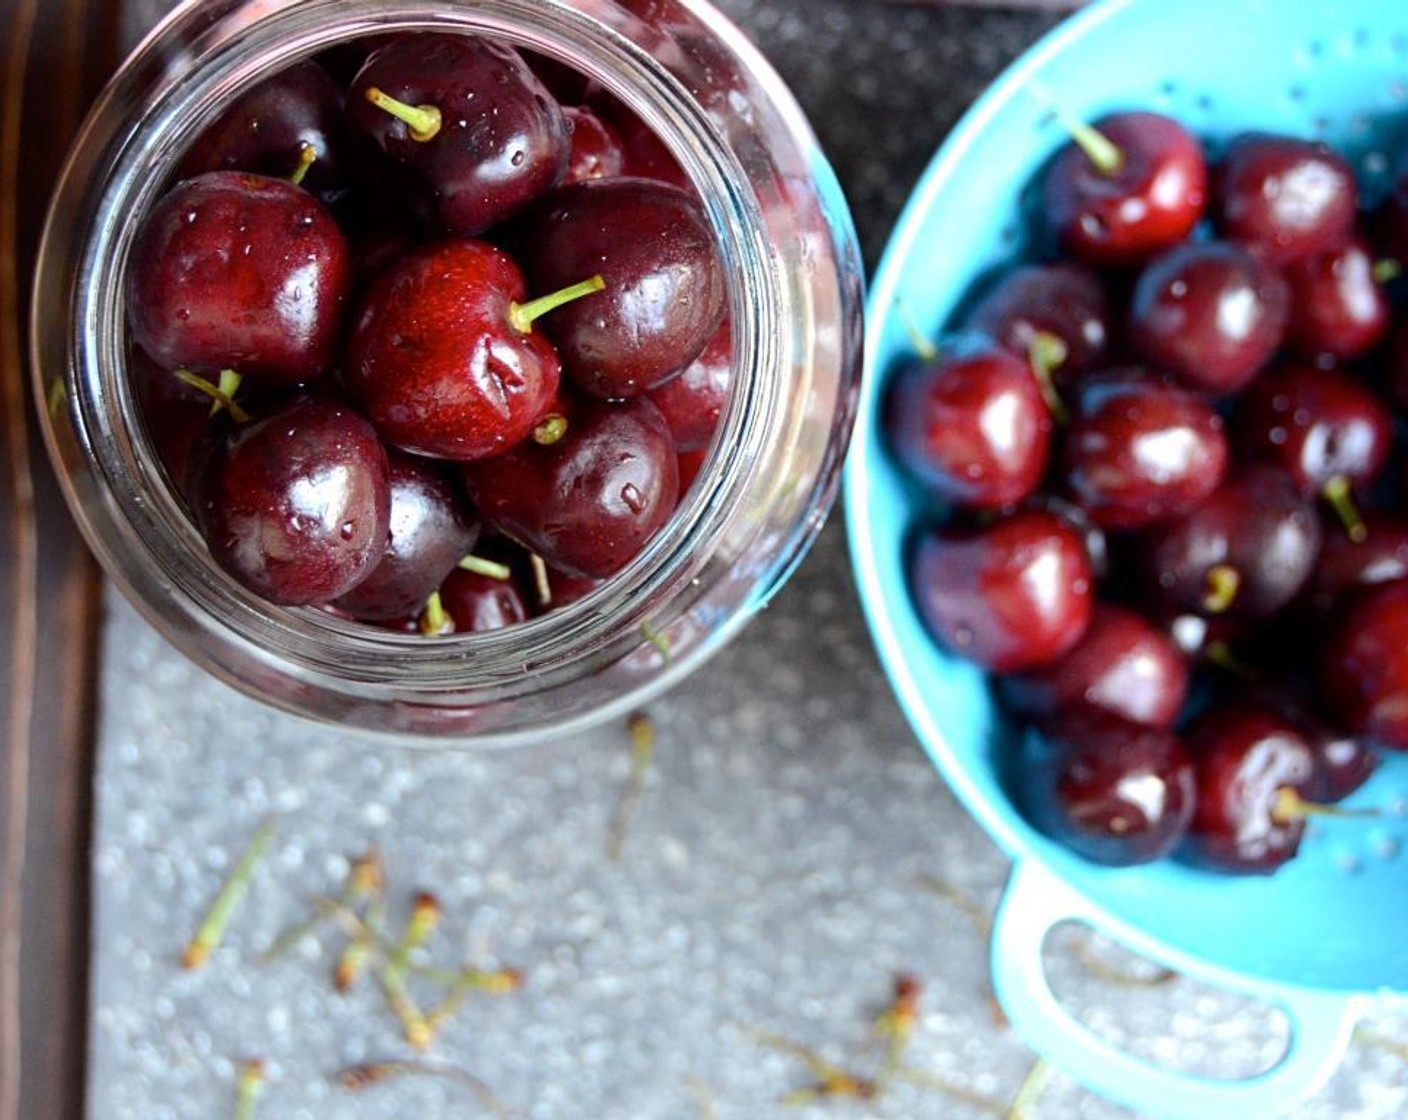 step 2 Pack the cherries into a clean ball canning Jar with tight fitting lid, filling it tightly and to the top.